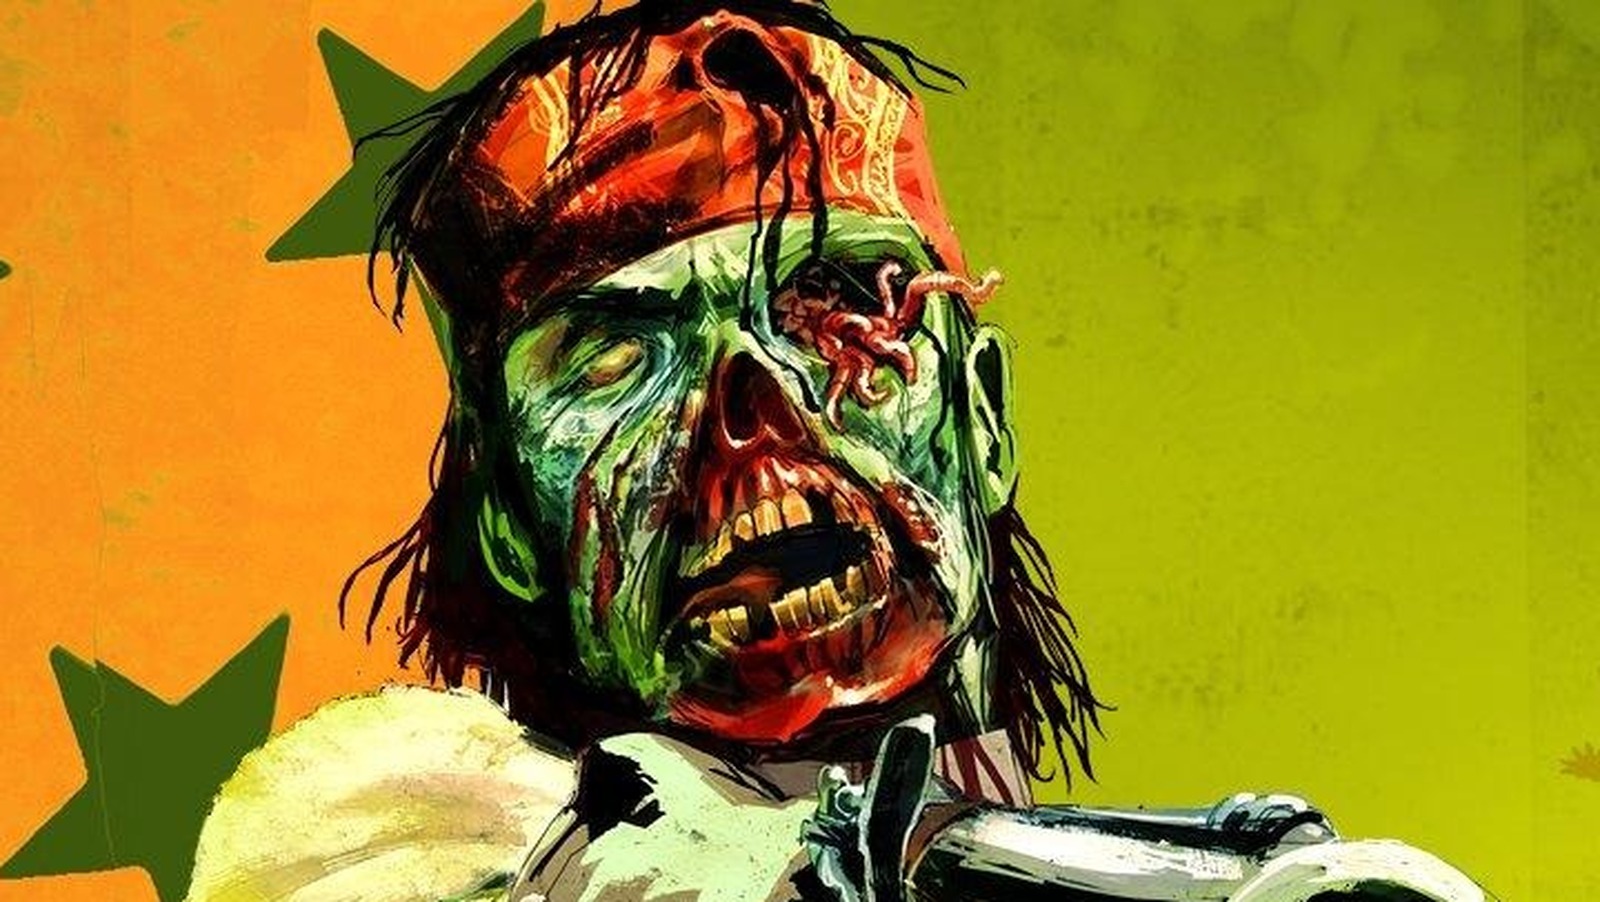 Modders Finally Bring Undead Nightmare To Red Dead Redemption 2